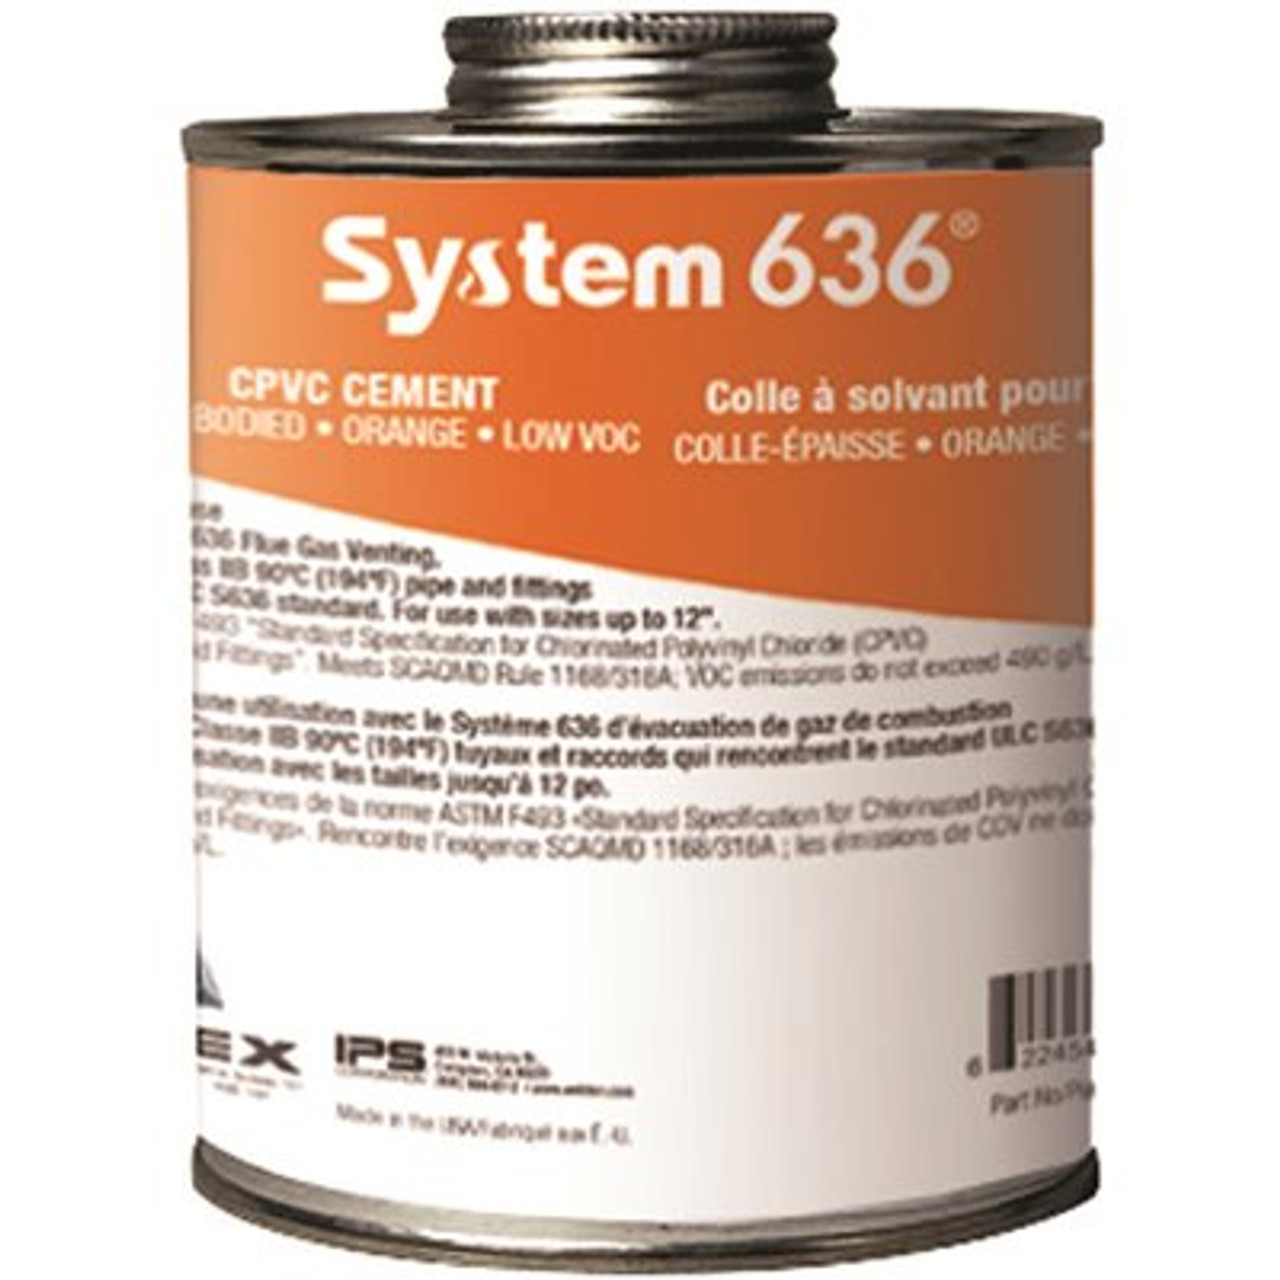 IPEX 1 Qt. Cpvc Cement For System 636